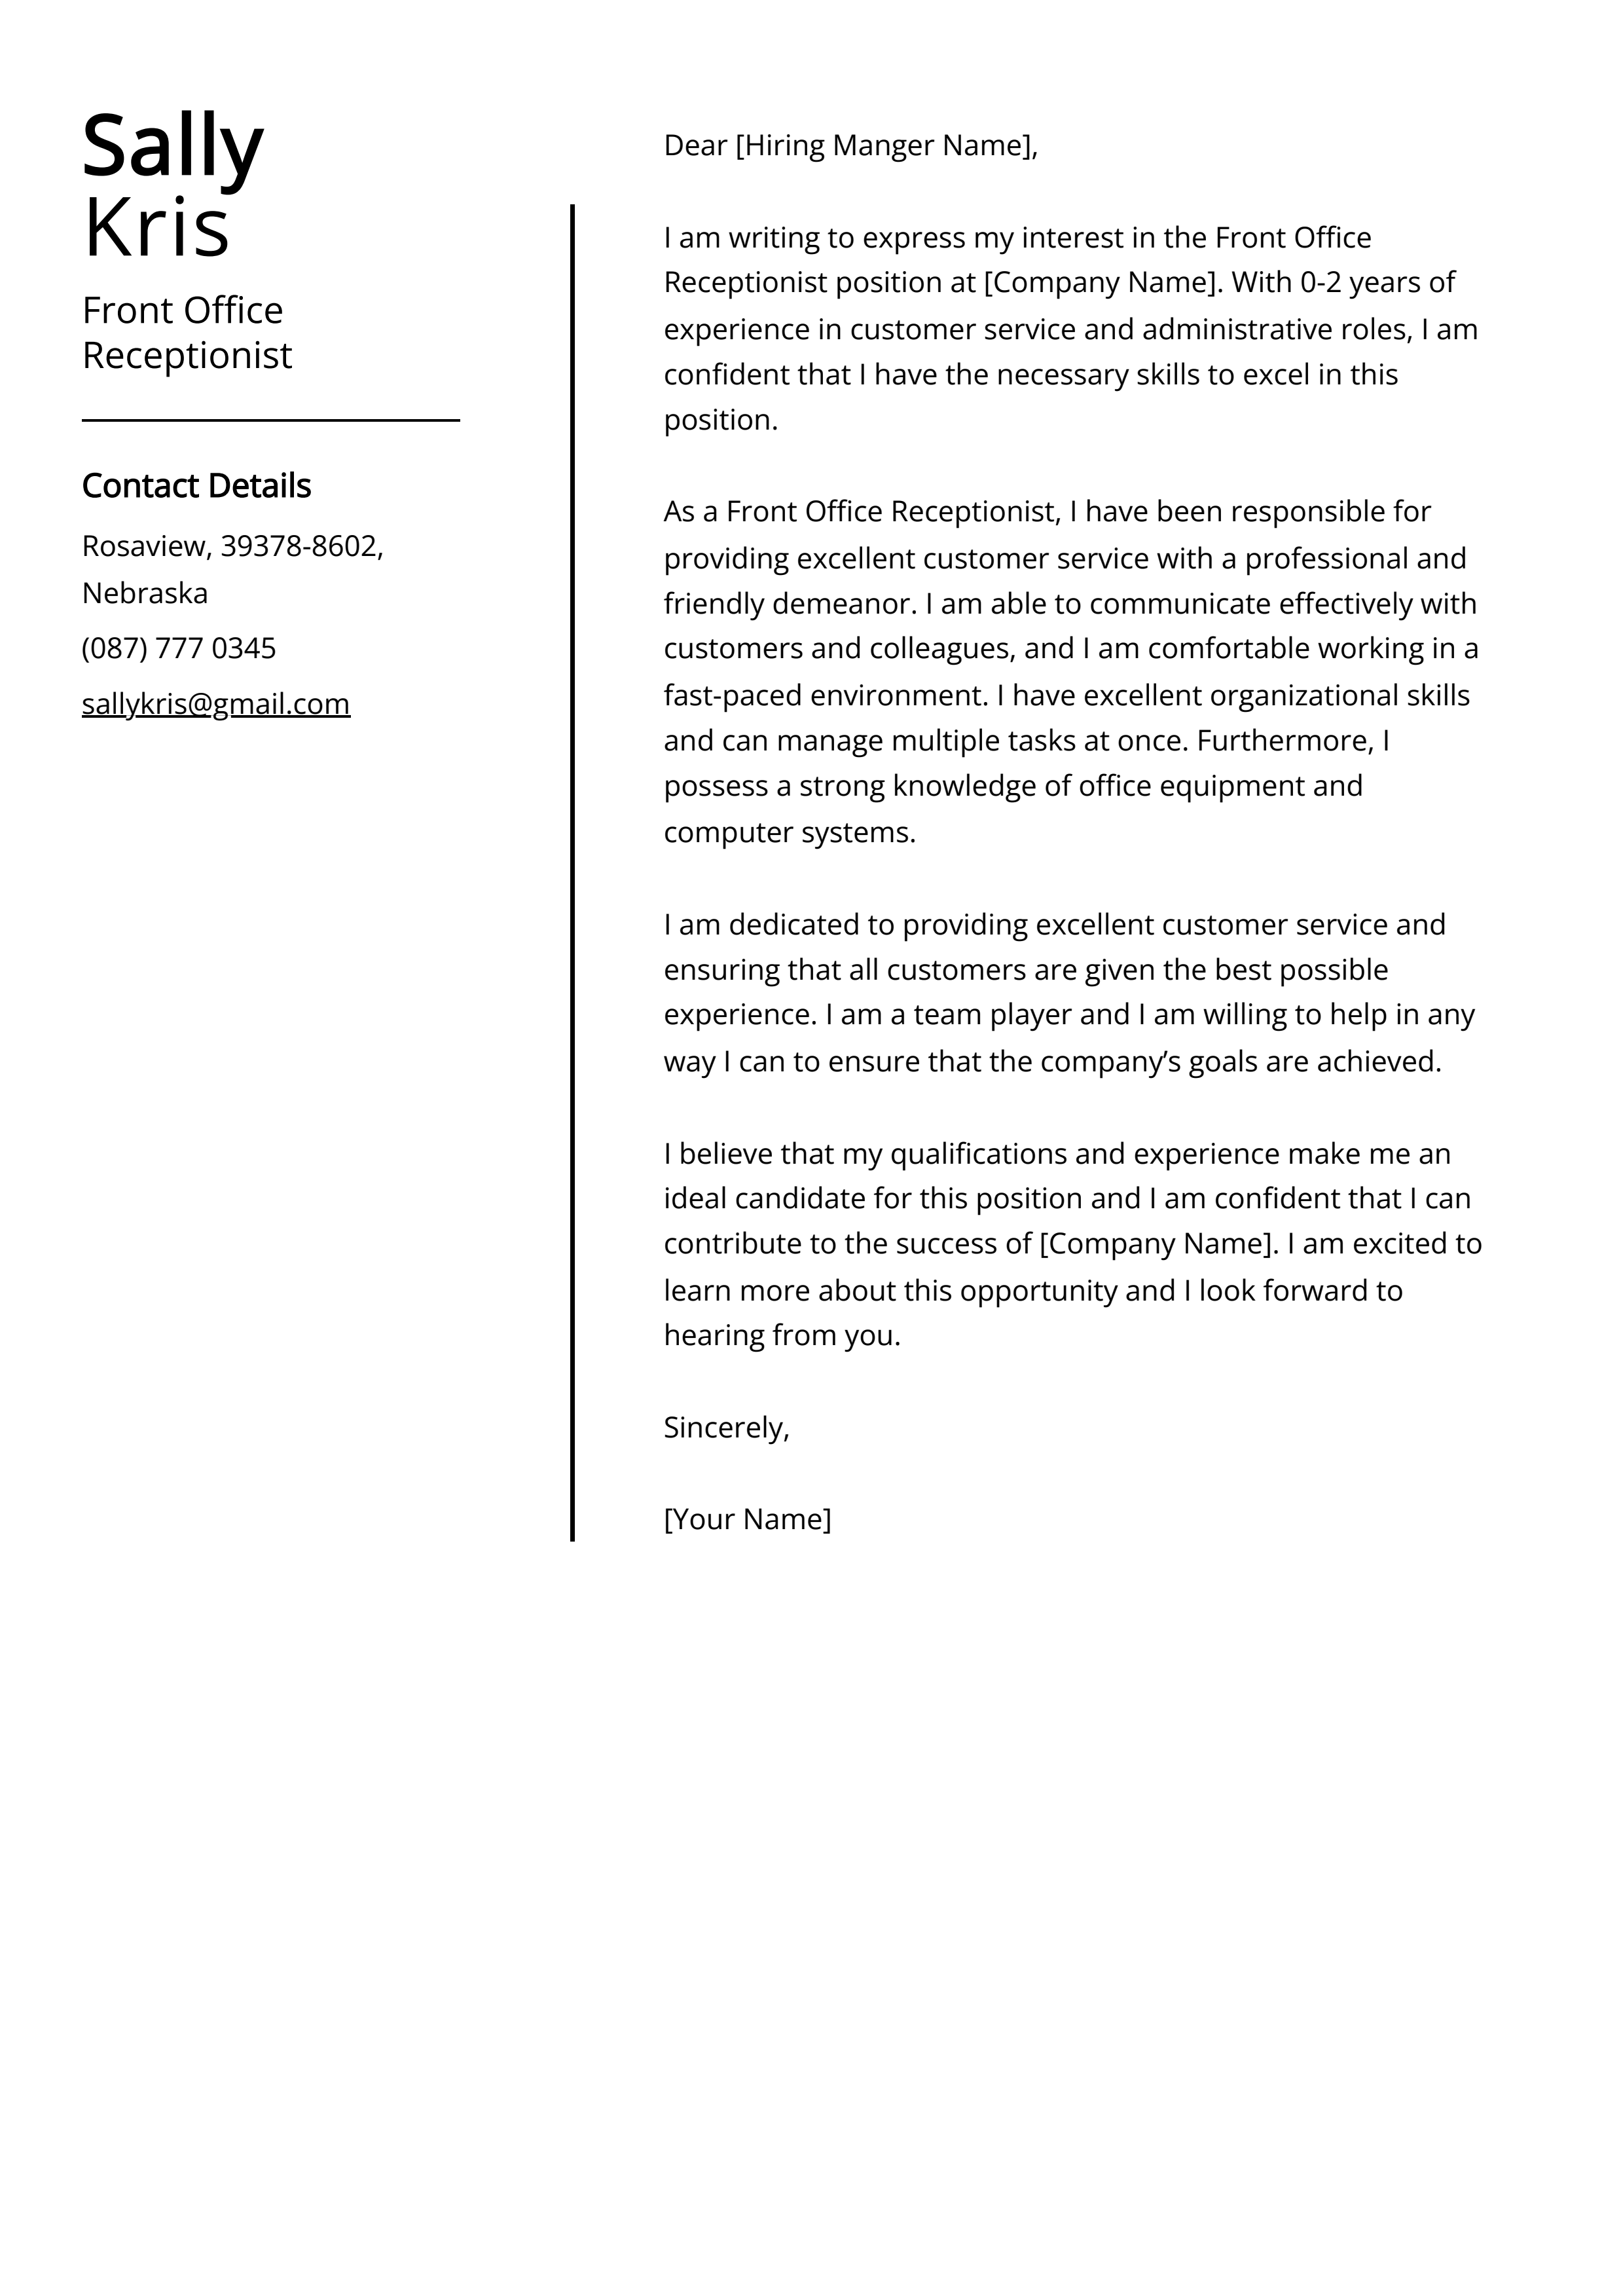 Front Office Receptionist Cover Letter Example